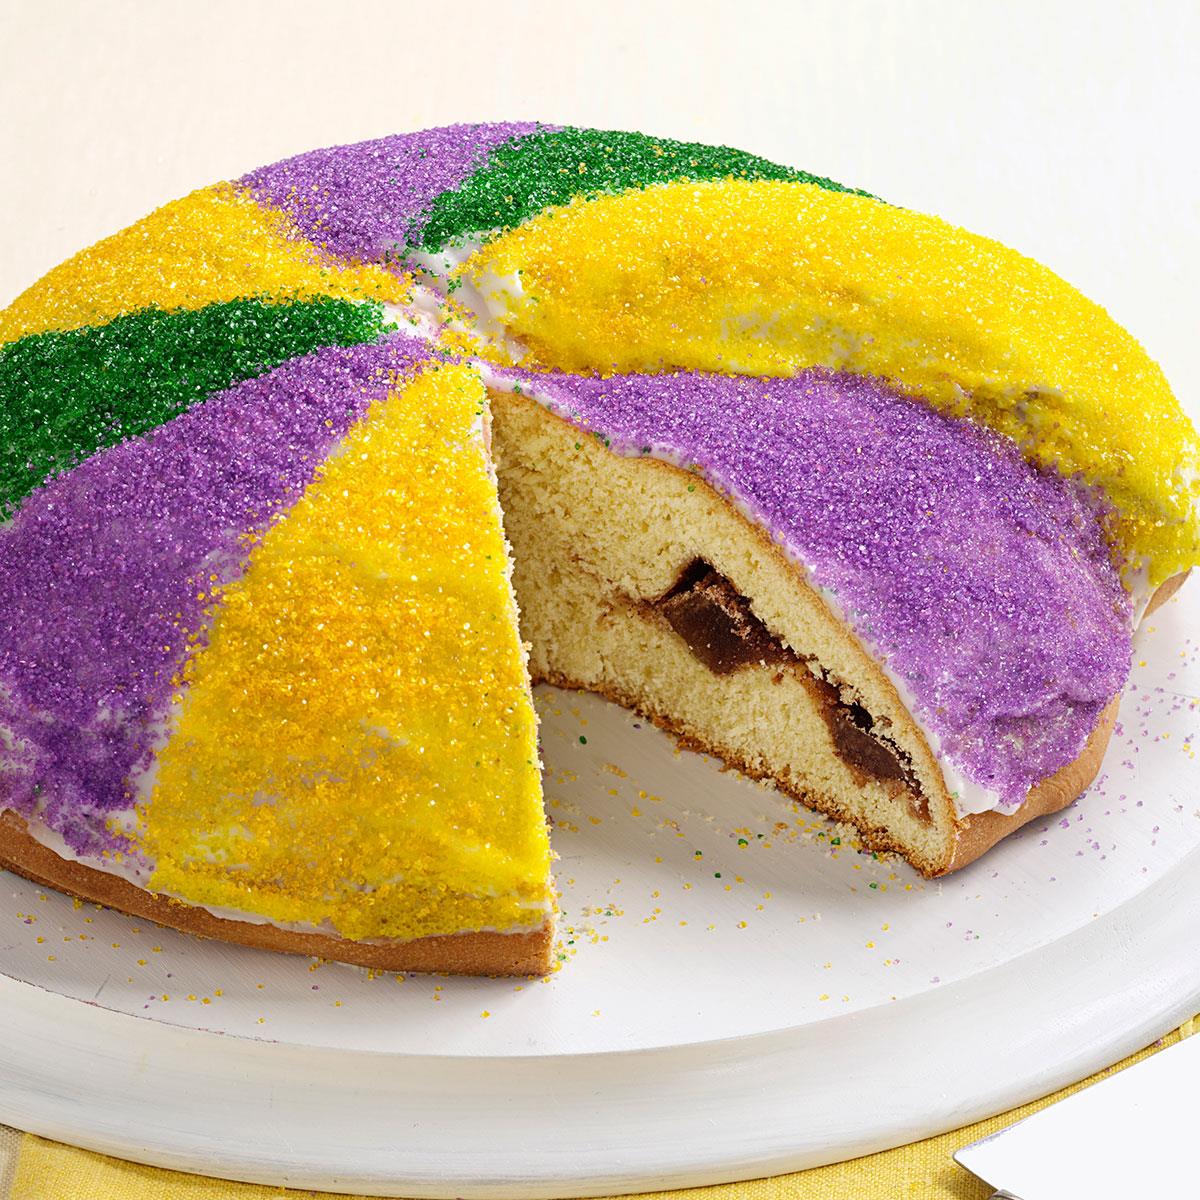 Hy-Vee - Be the life of the Mardi with King Cakes and Paczkis for your  Mardi Gras celebration, fresh from our bakery! | Facebook